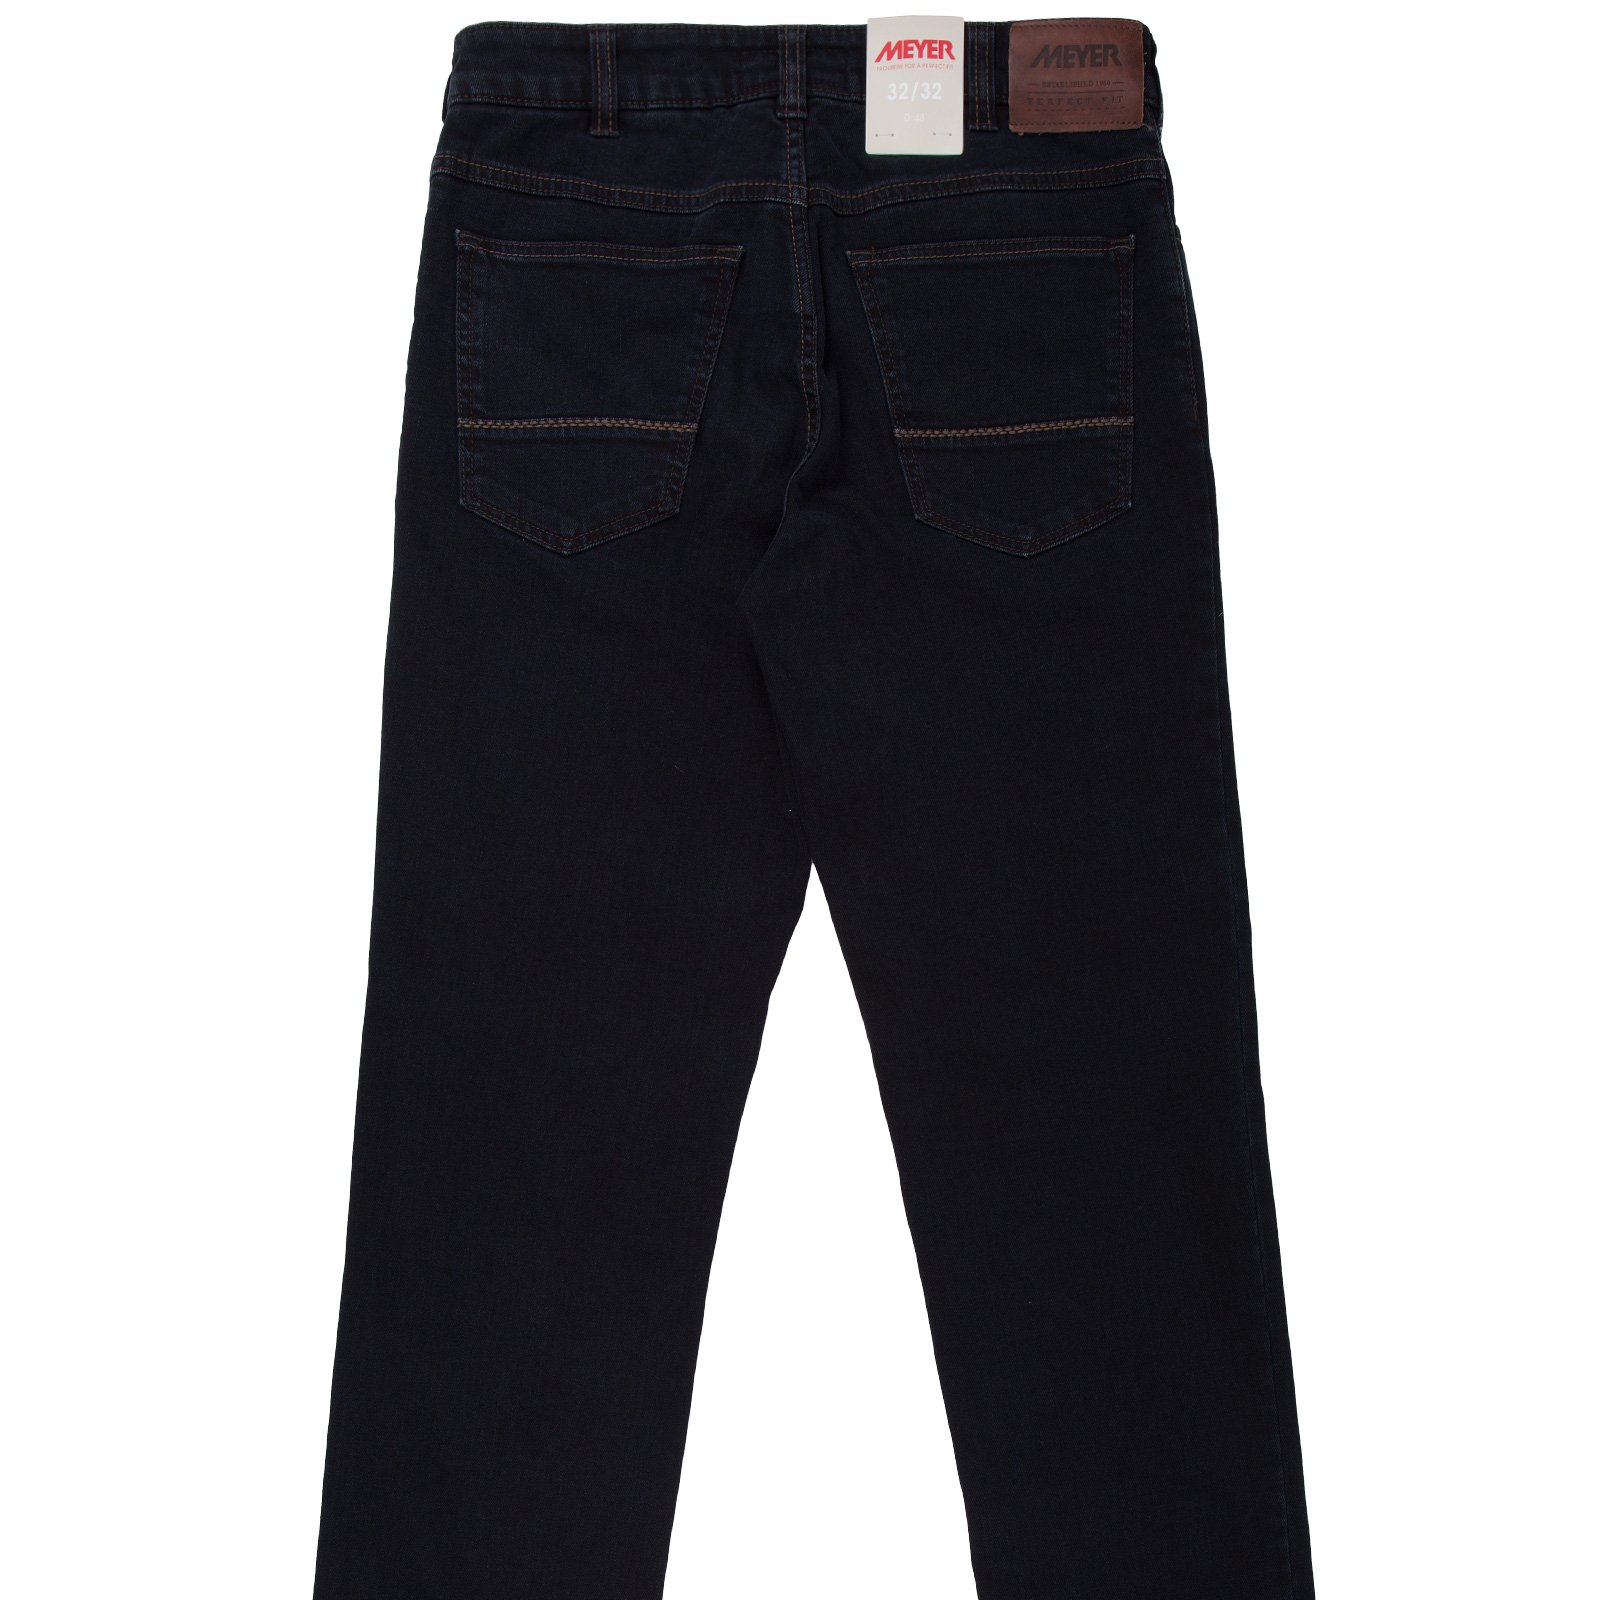 Durban Fair Trade Stretch Denim Jeans - Jeans : FA2 Online Outlet Store ...